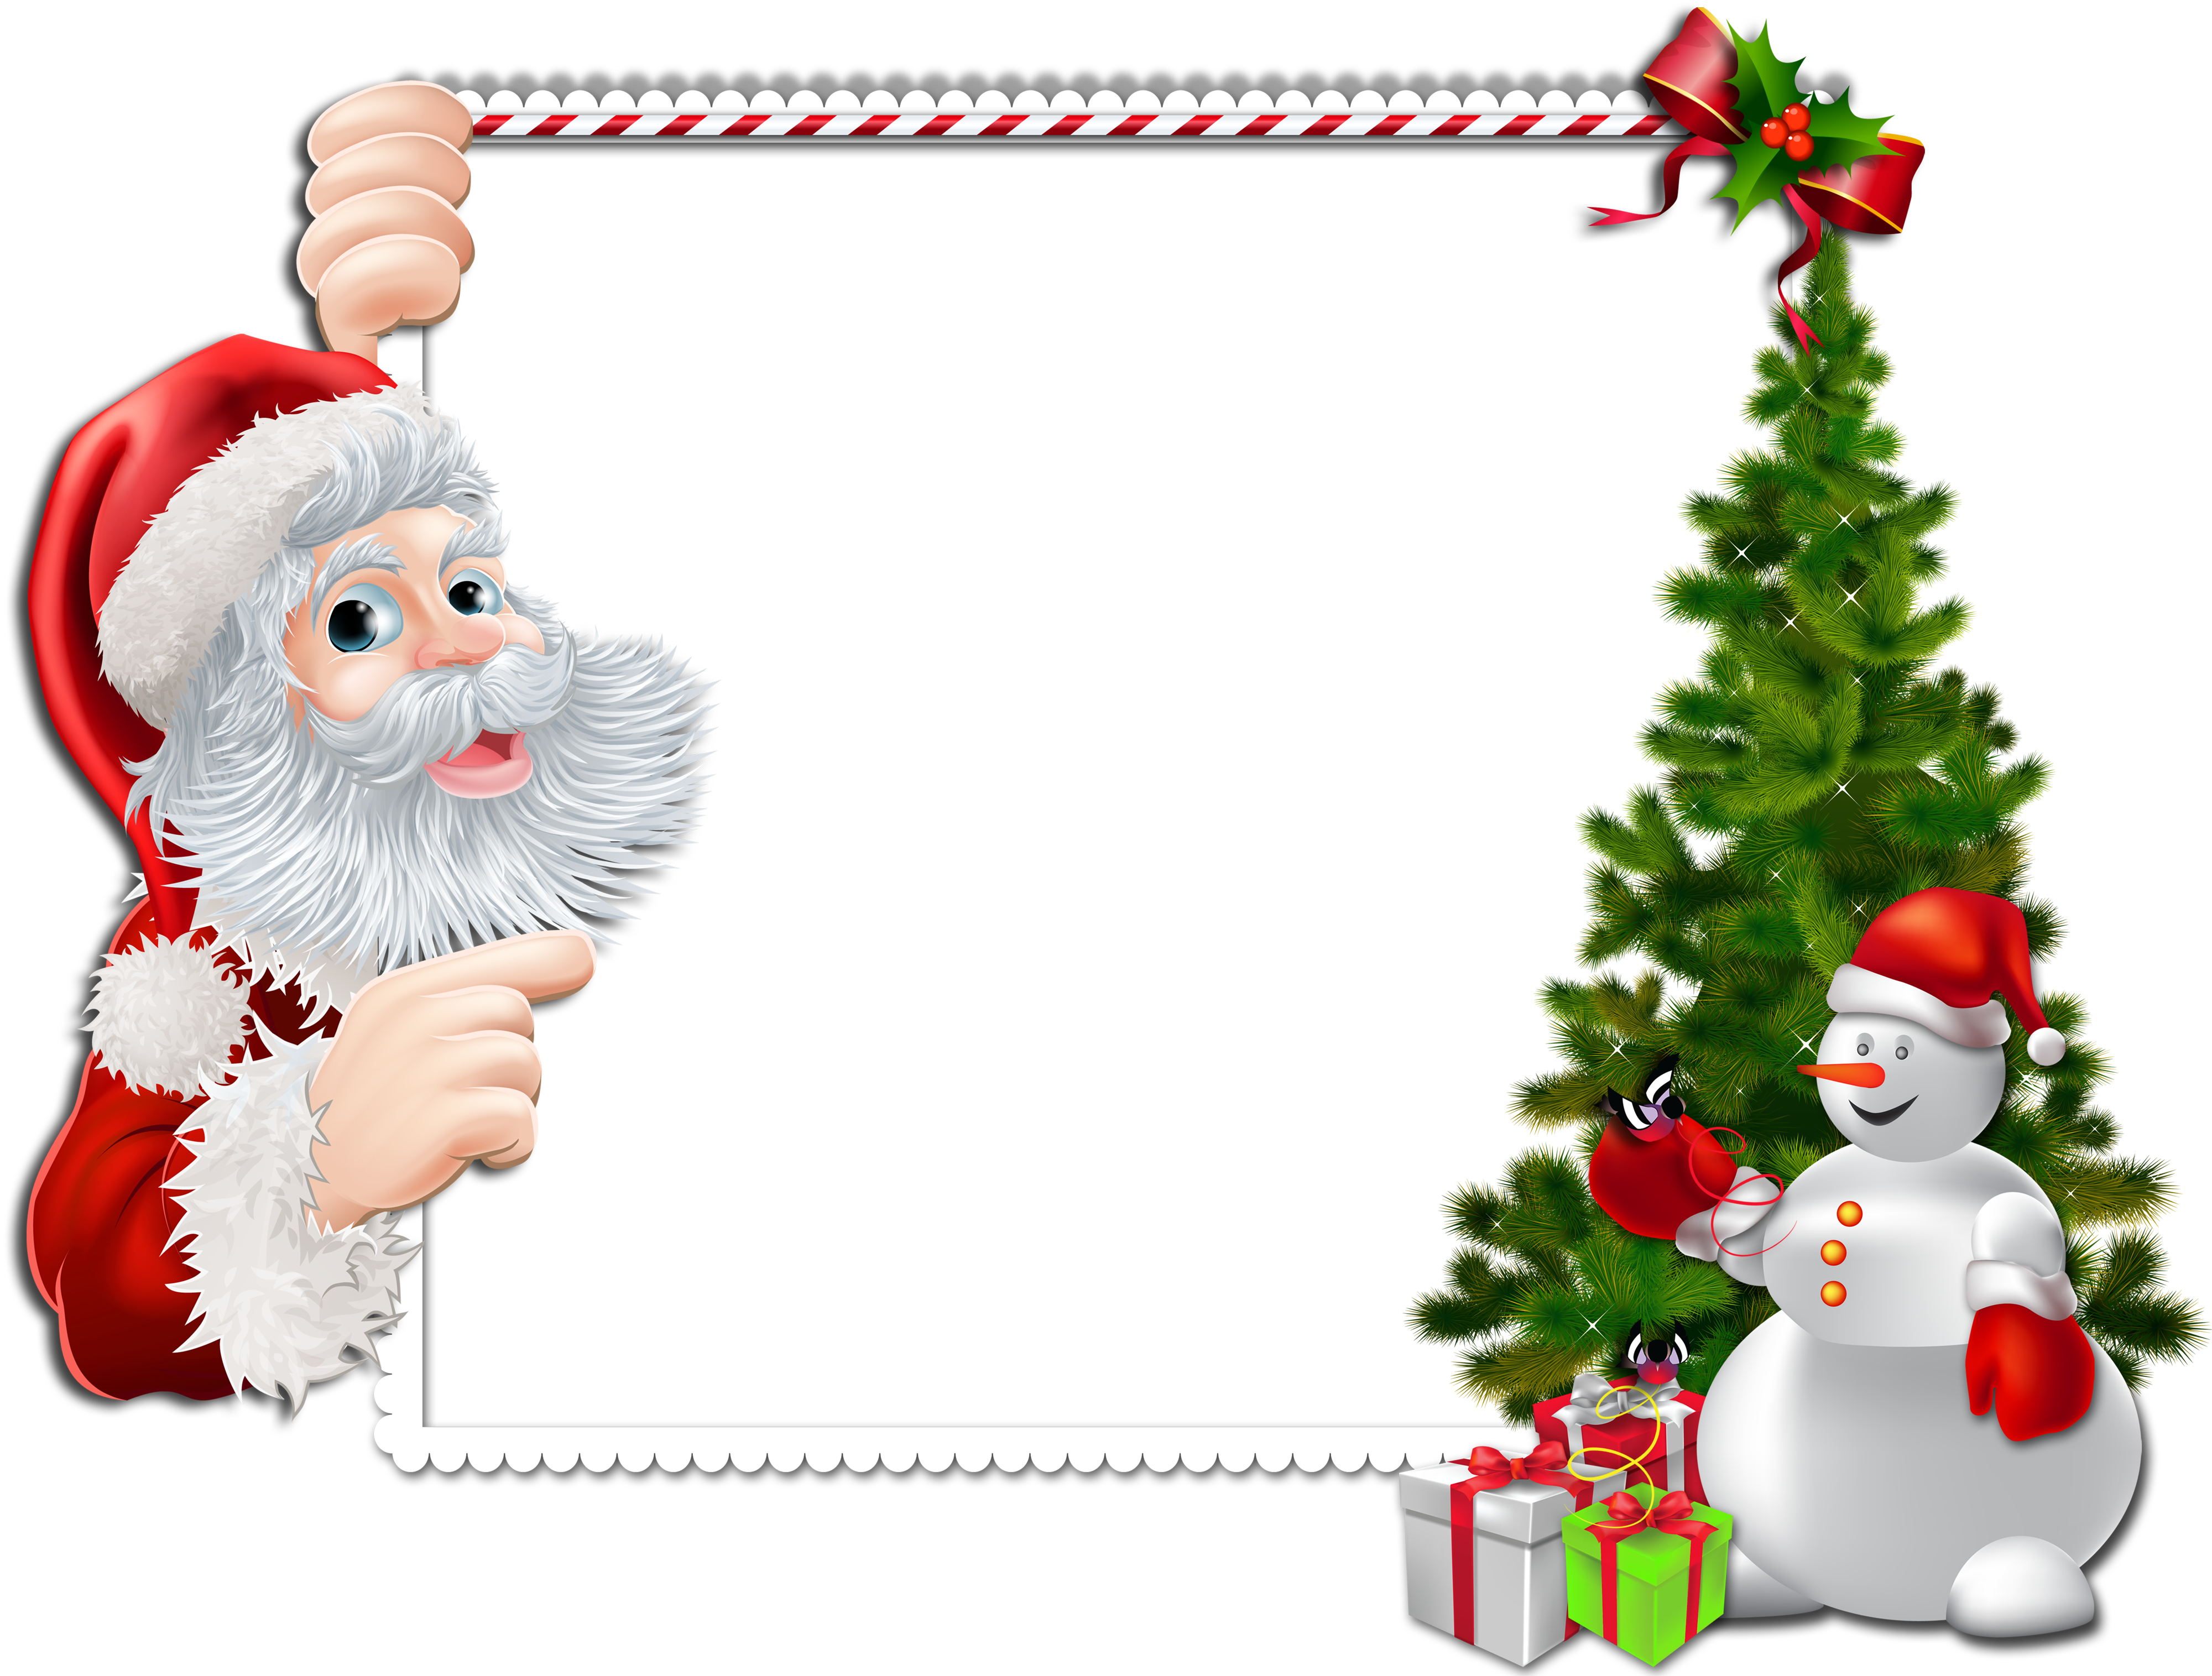 Santa, Snowman, Gifts, Tree In Christmas Frame Borders PNG Transparent  Background, Free Download #47111 - FreeIconsPNG